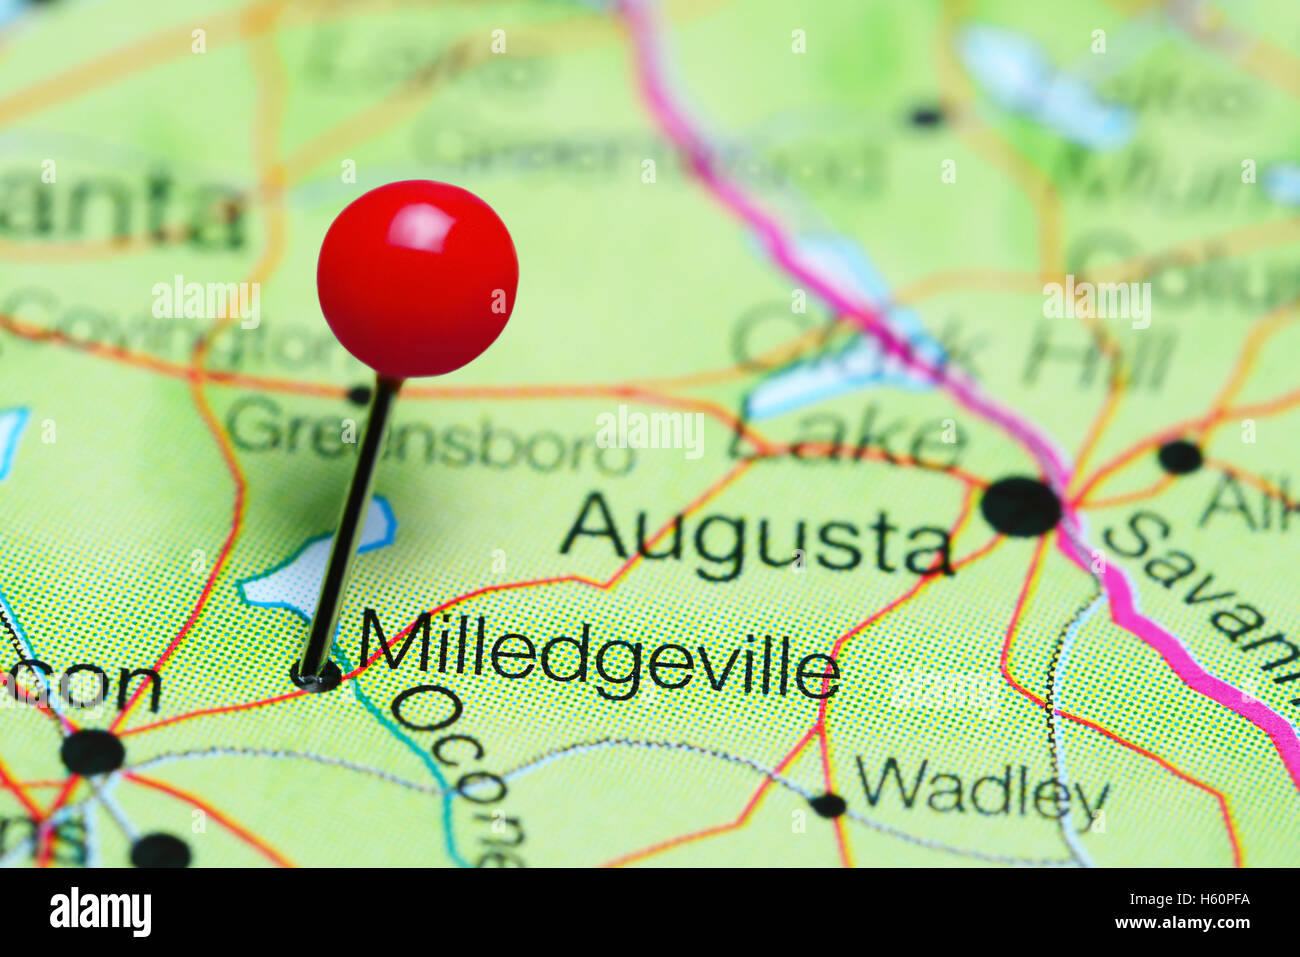 Milledgeville pinned on a map of Georgia, USA Stock Photo